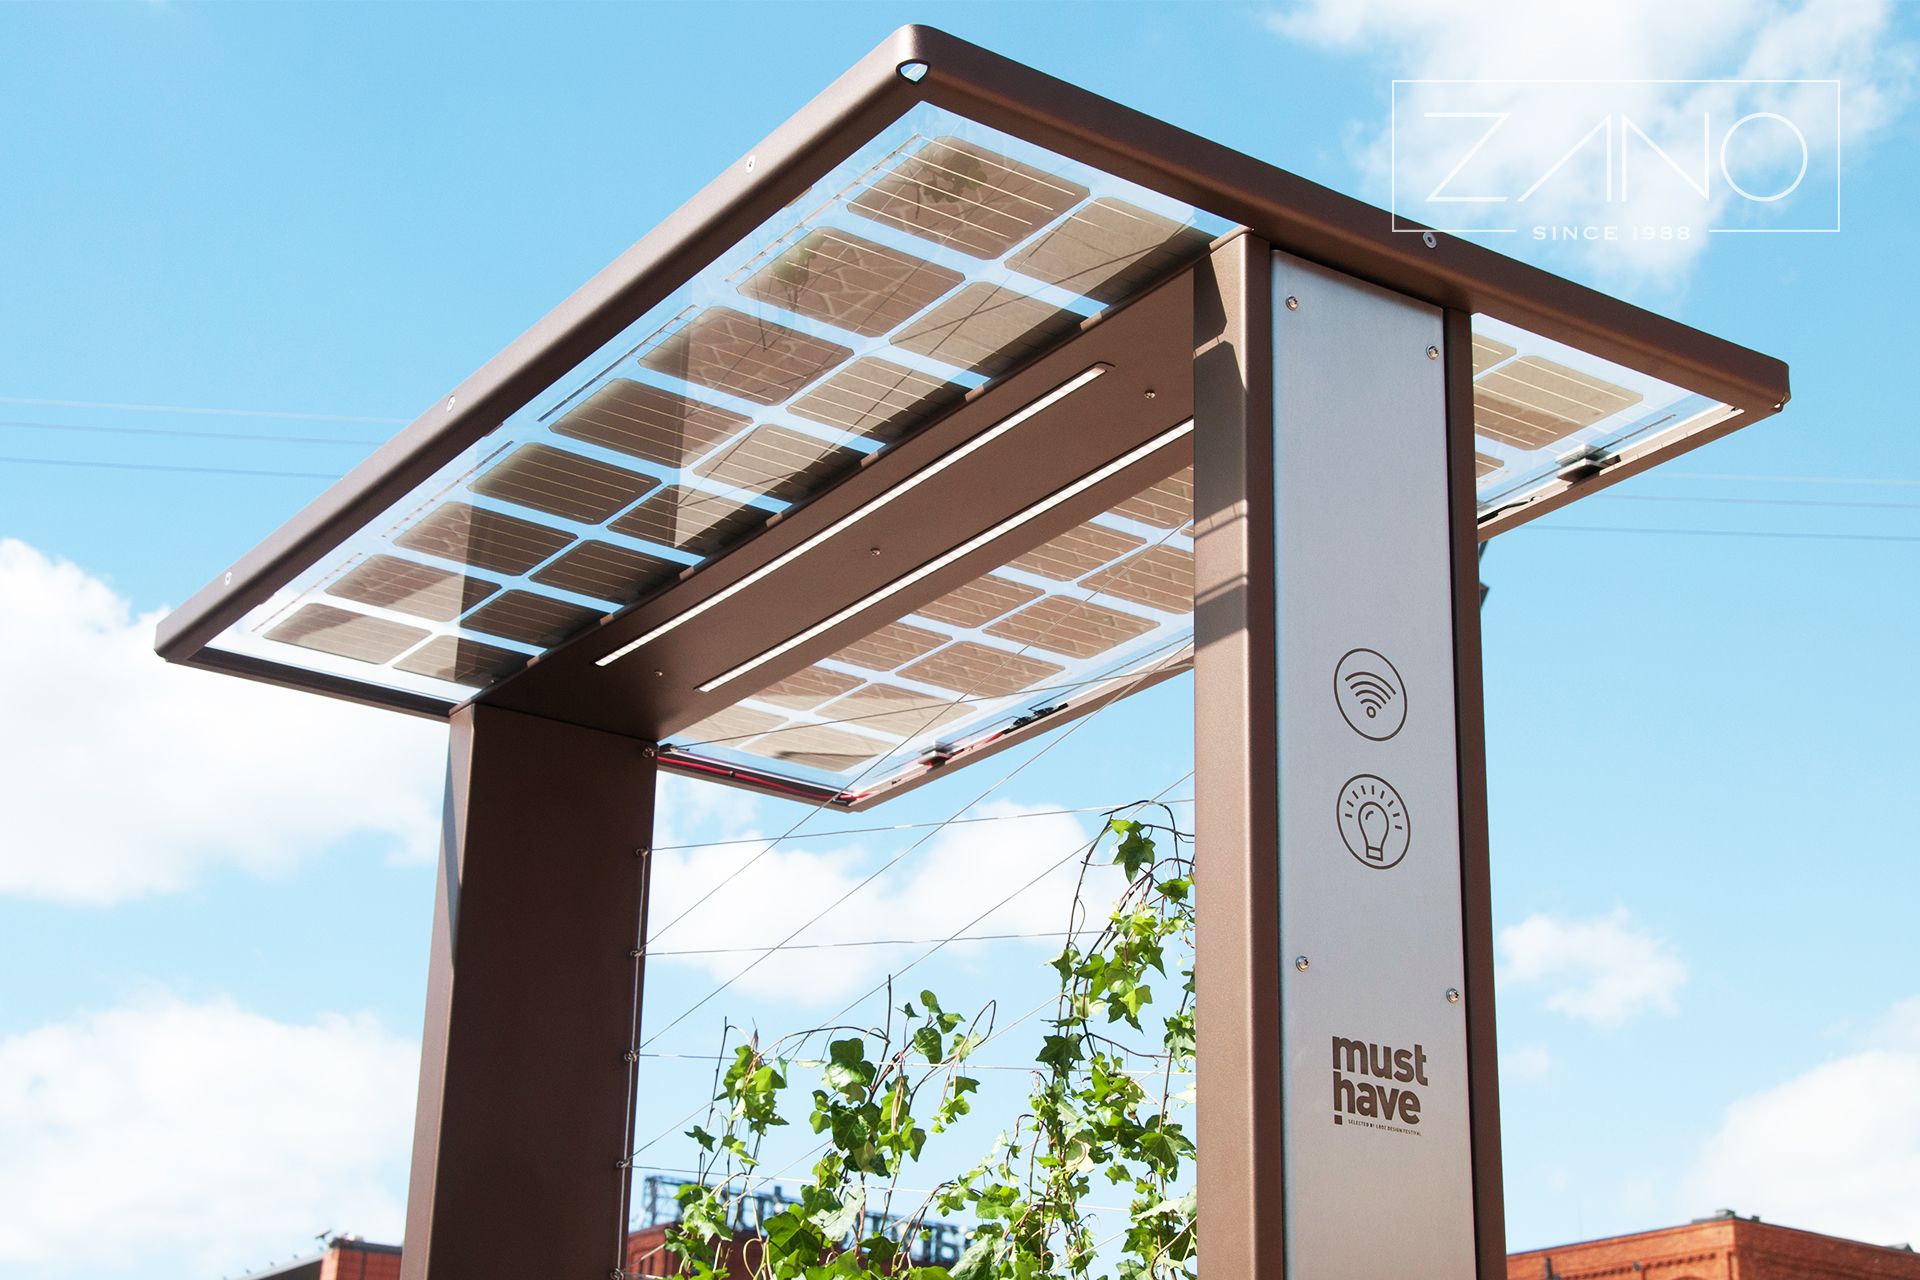 City solar charging station with additional bench and tables